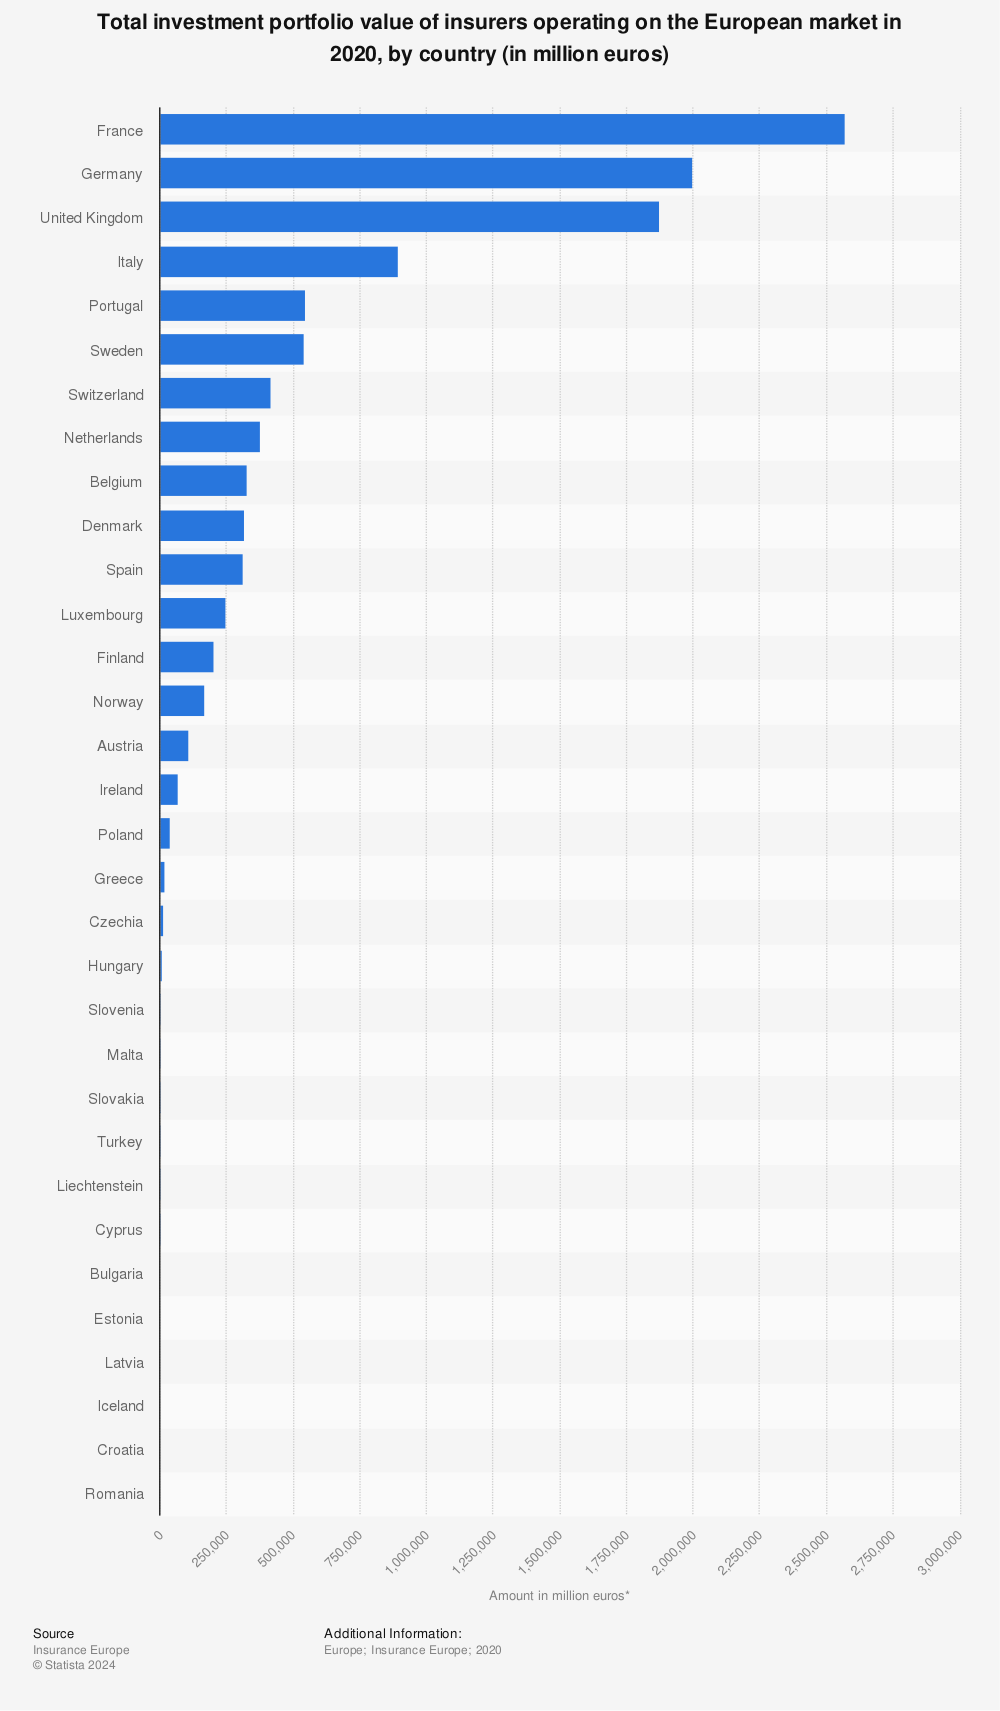 Statistic: Total investment portfolio value of insurers operating on the European market in 2020, by country (in million euros) | Statista